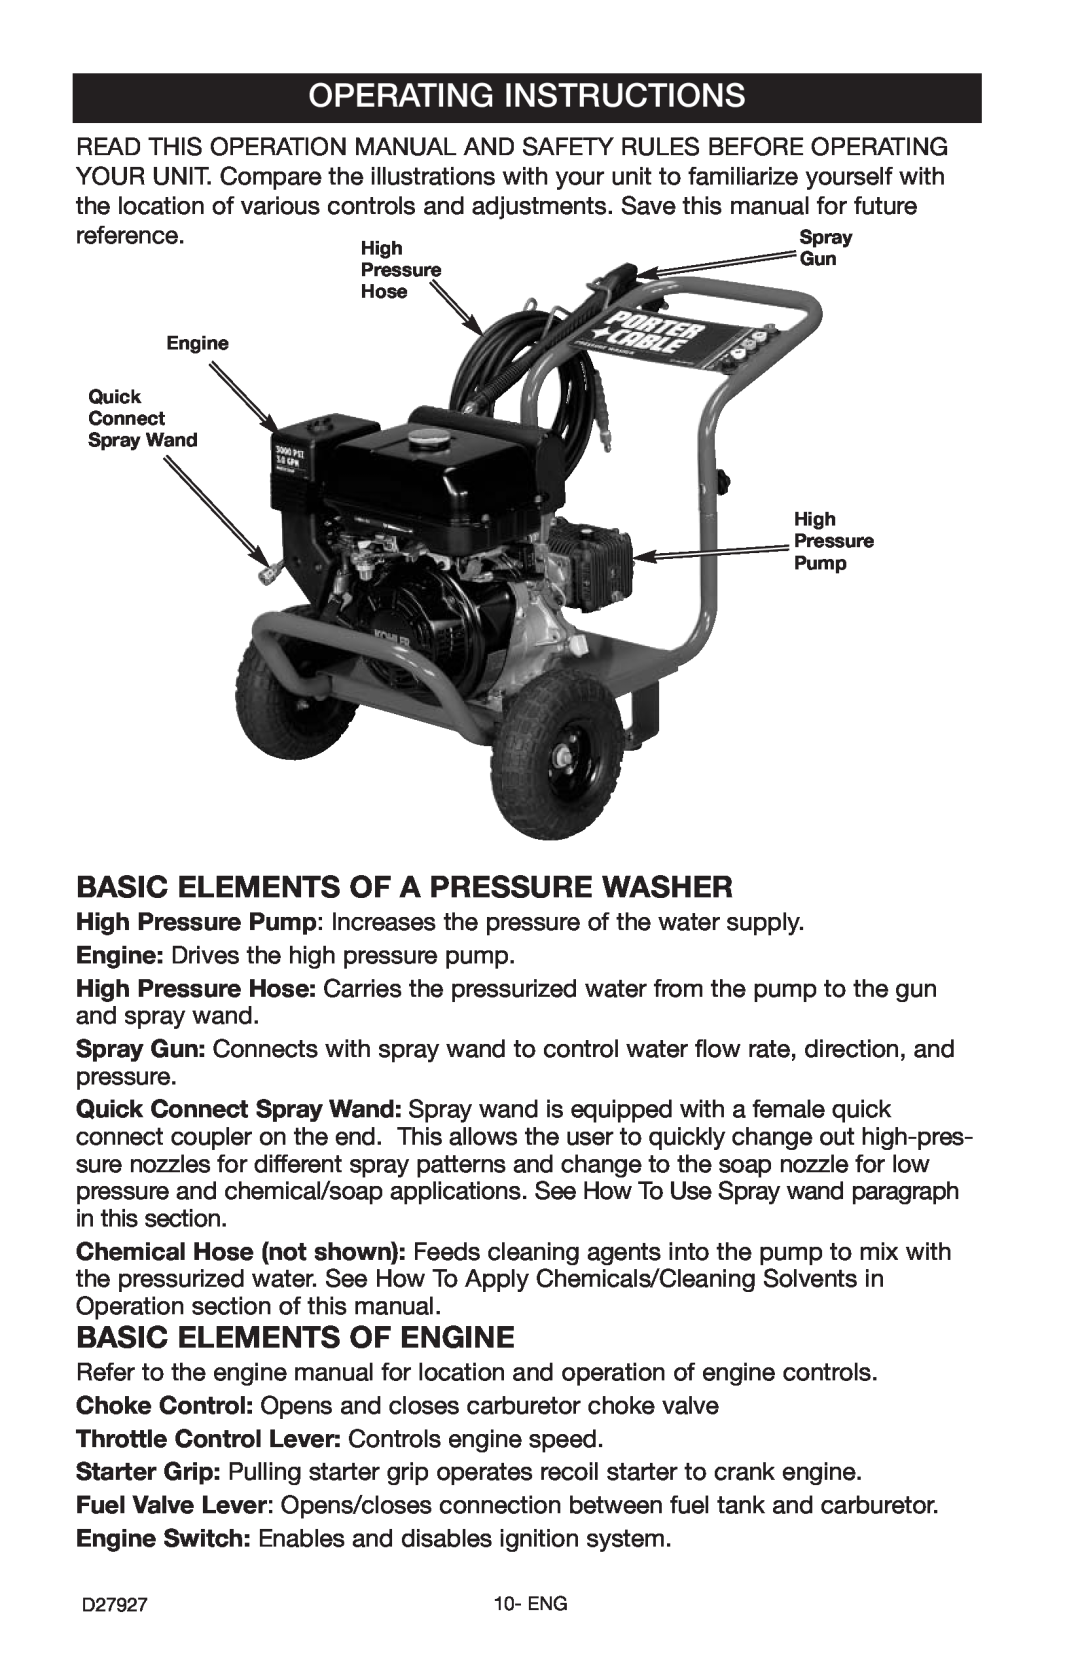 Porter-Cable PCK3030SP, D27927-034-0 Operating Instructions, Basic Elements Of A Pressure Washer, Basic Elements Of Engine 